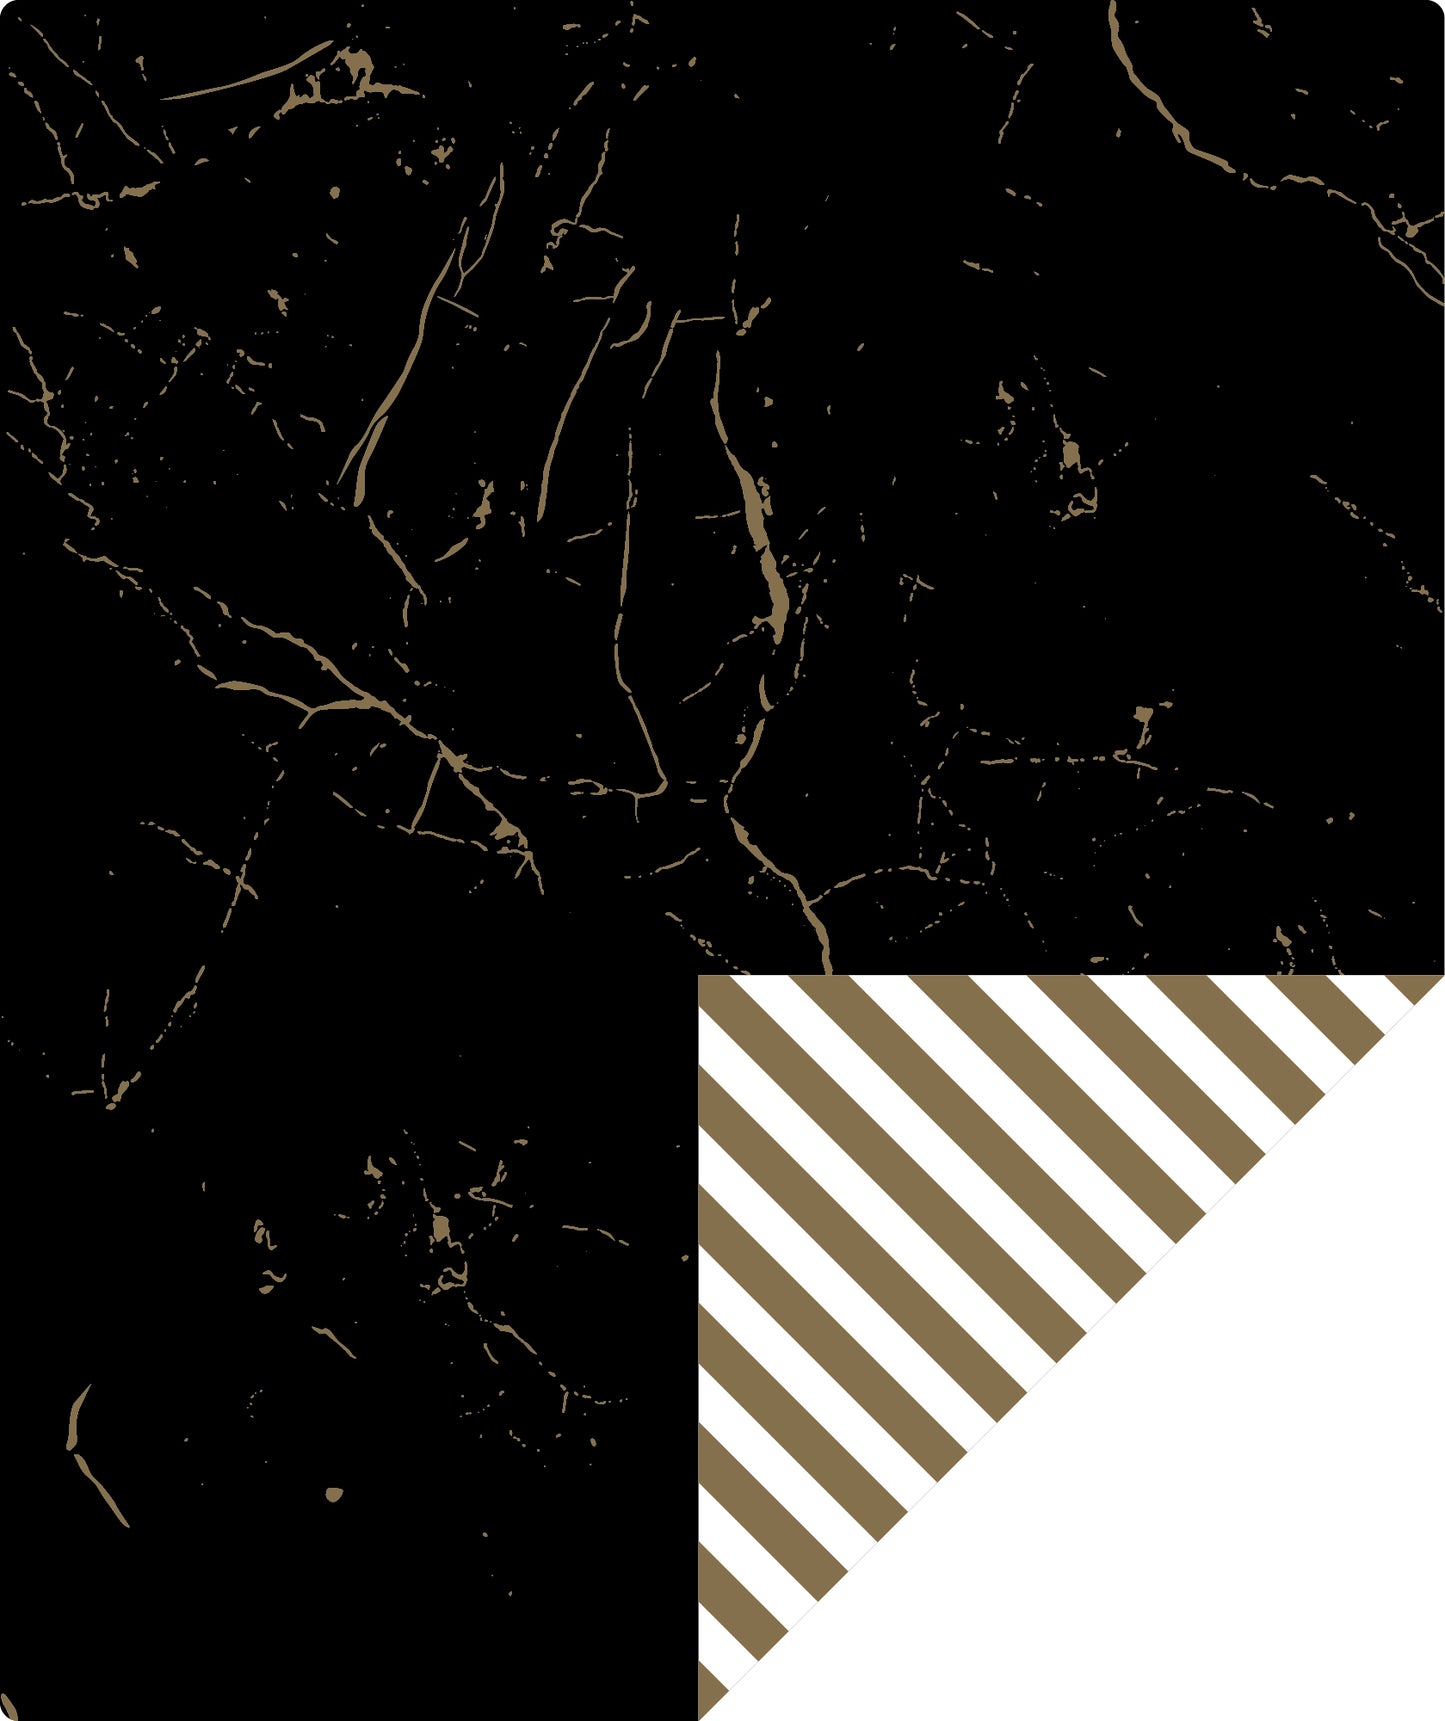 Black & Gold Marble Wrapping Paper with Gold Stripe Jumbo Roll Wholesale Wrapaholic